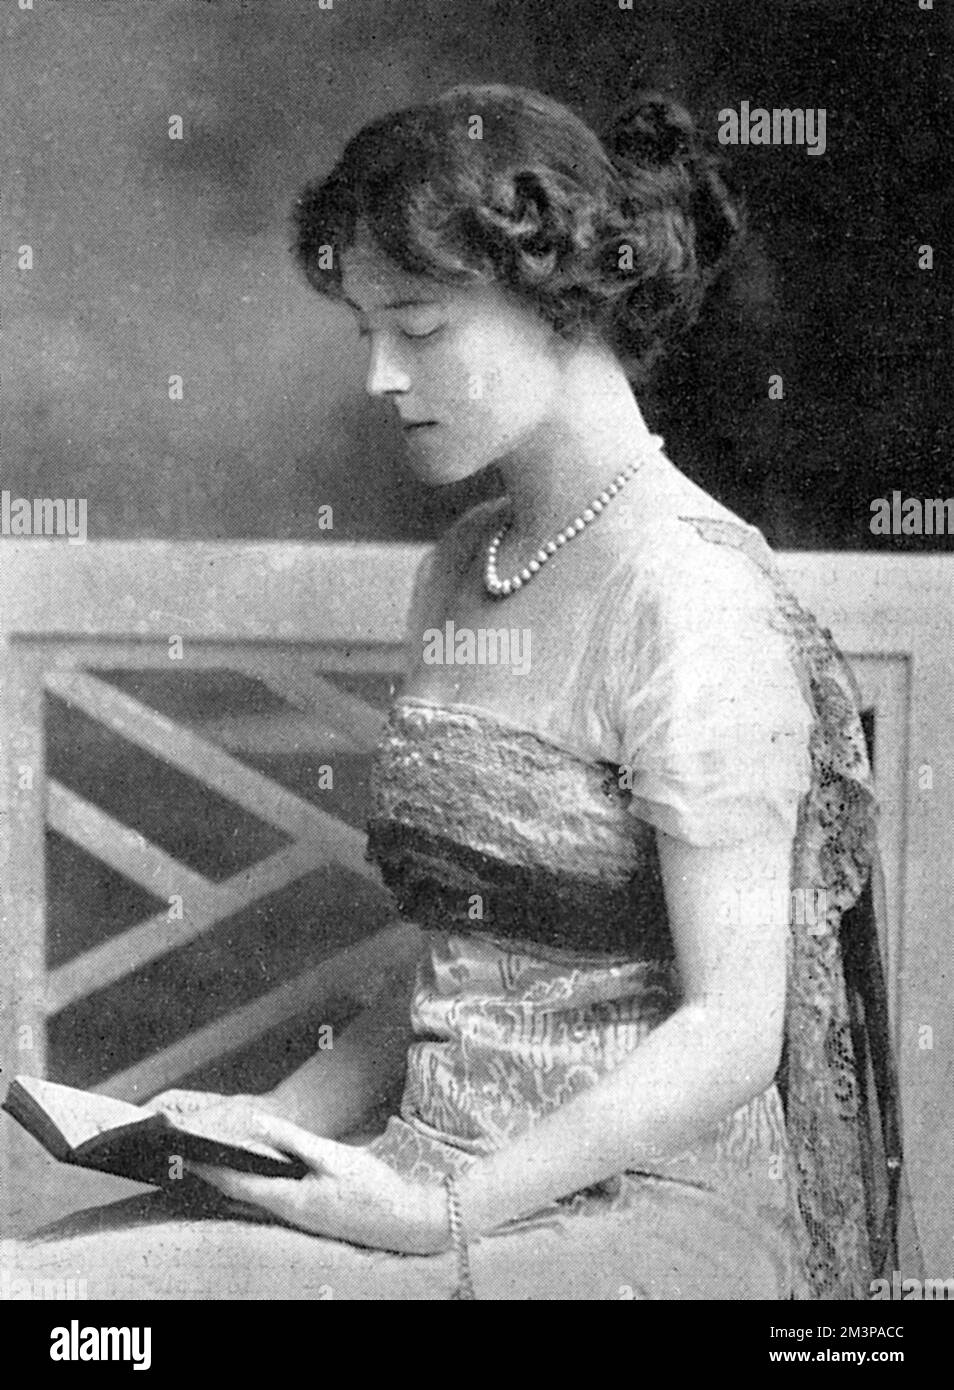 The Marchioness of Downshire, nee Evelyn Grace Mary Foster, pictured peacefully reading a book. At the time this picture was published, the Marchioness was lying dangerously ill with typhoid fever at Easthampstead Park, the 6th Marquis' Berkshire seat. She did not succumb to the fever however, and lived until 1942.     Date: 1915 Stock Photo